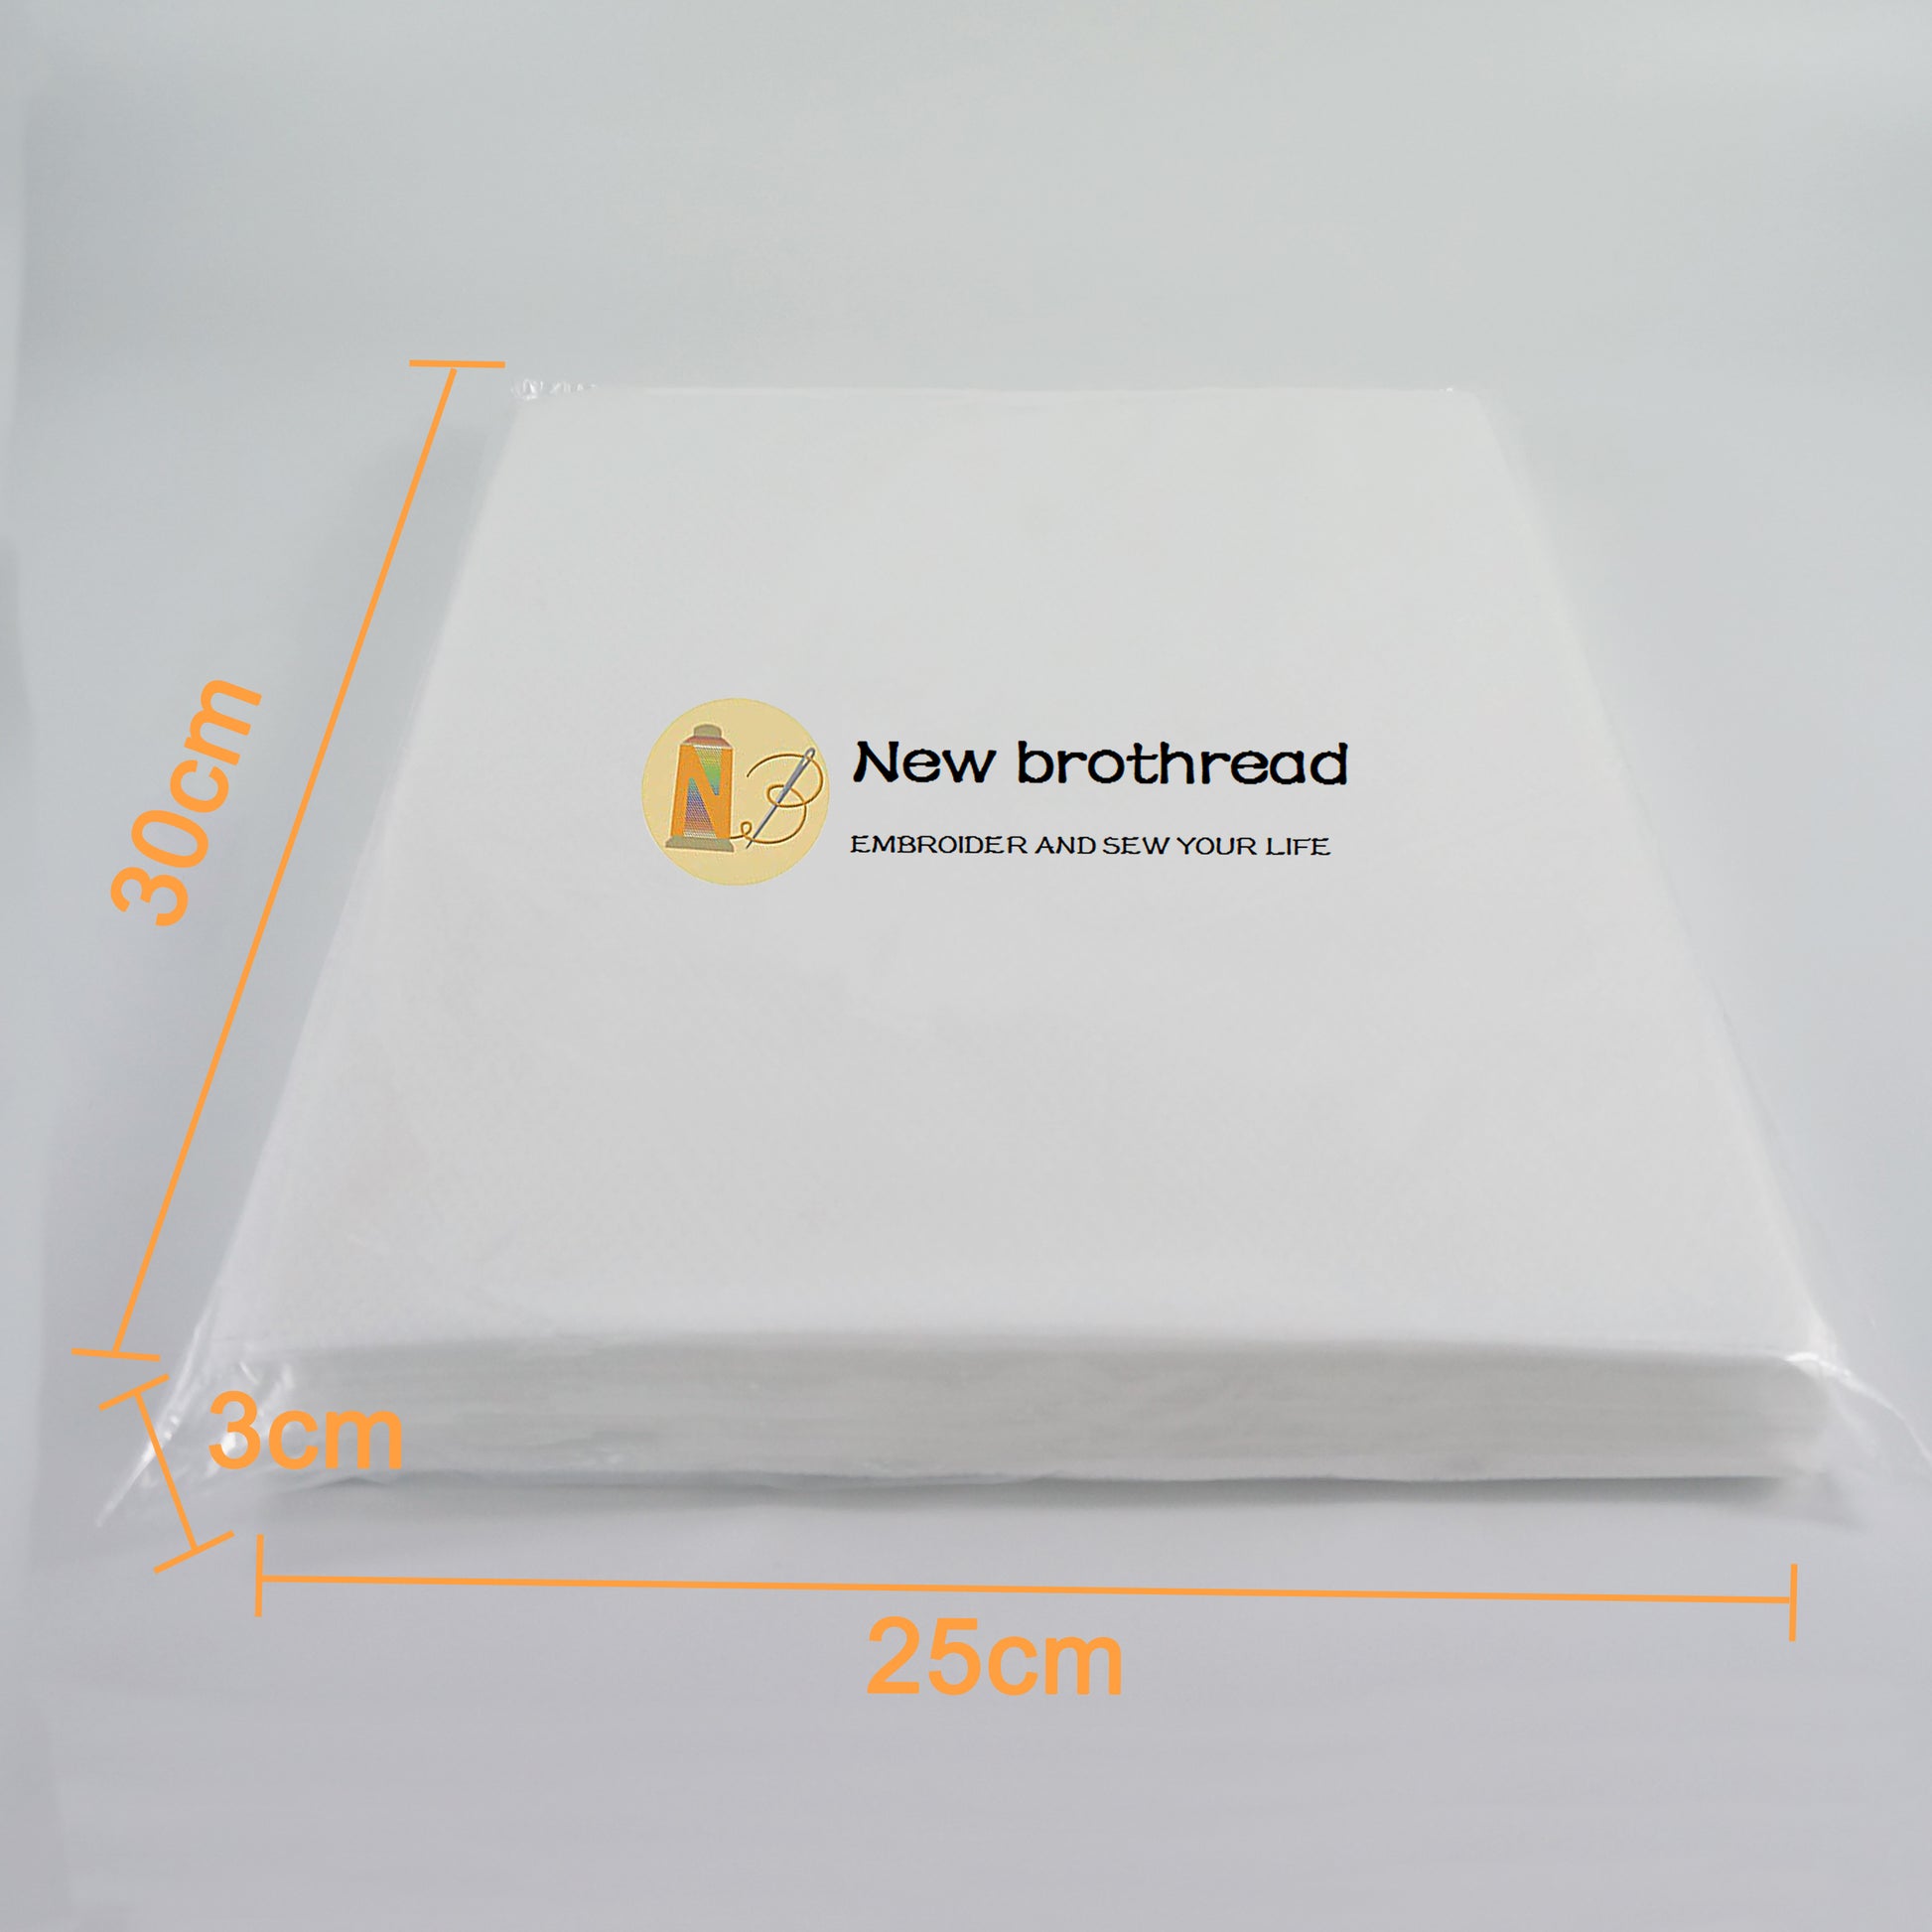 New brothread No Show Mesh Machine Embroidery Stabilizer Backing 15 x 25 yd Roll - Light Weight 1.8 oz - Cut Into Variable Sizes for Machine